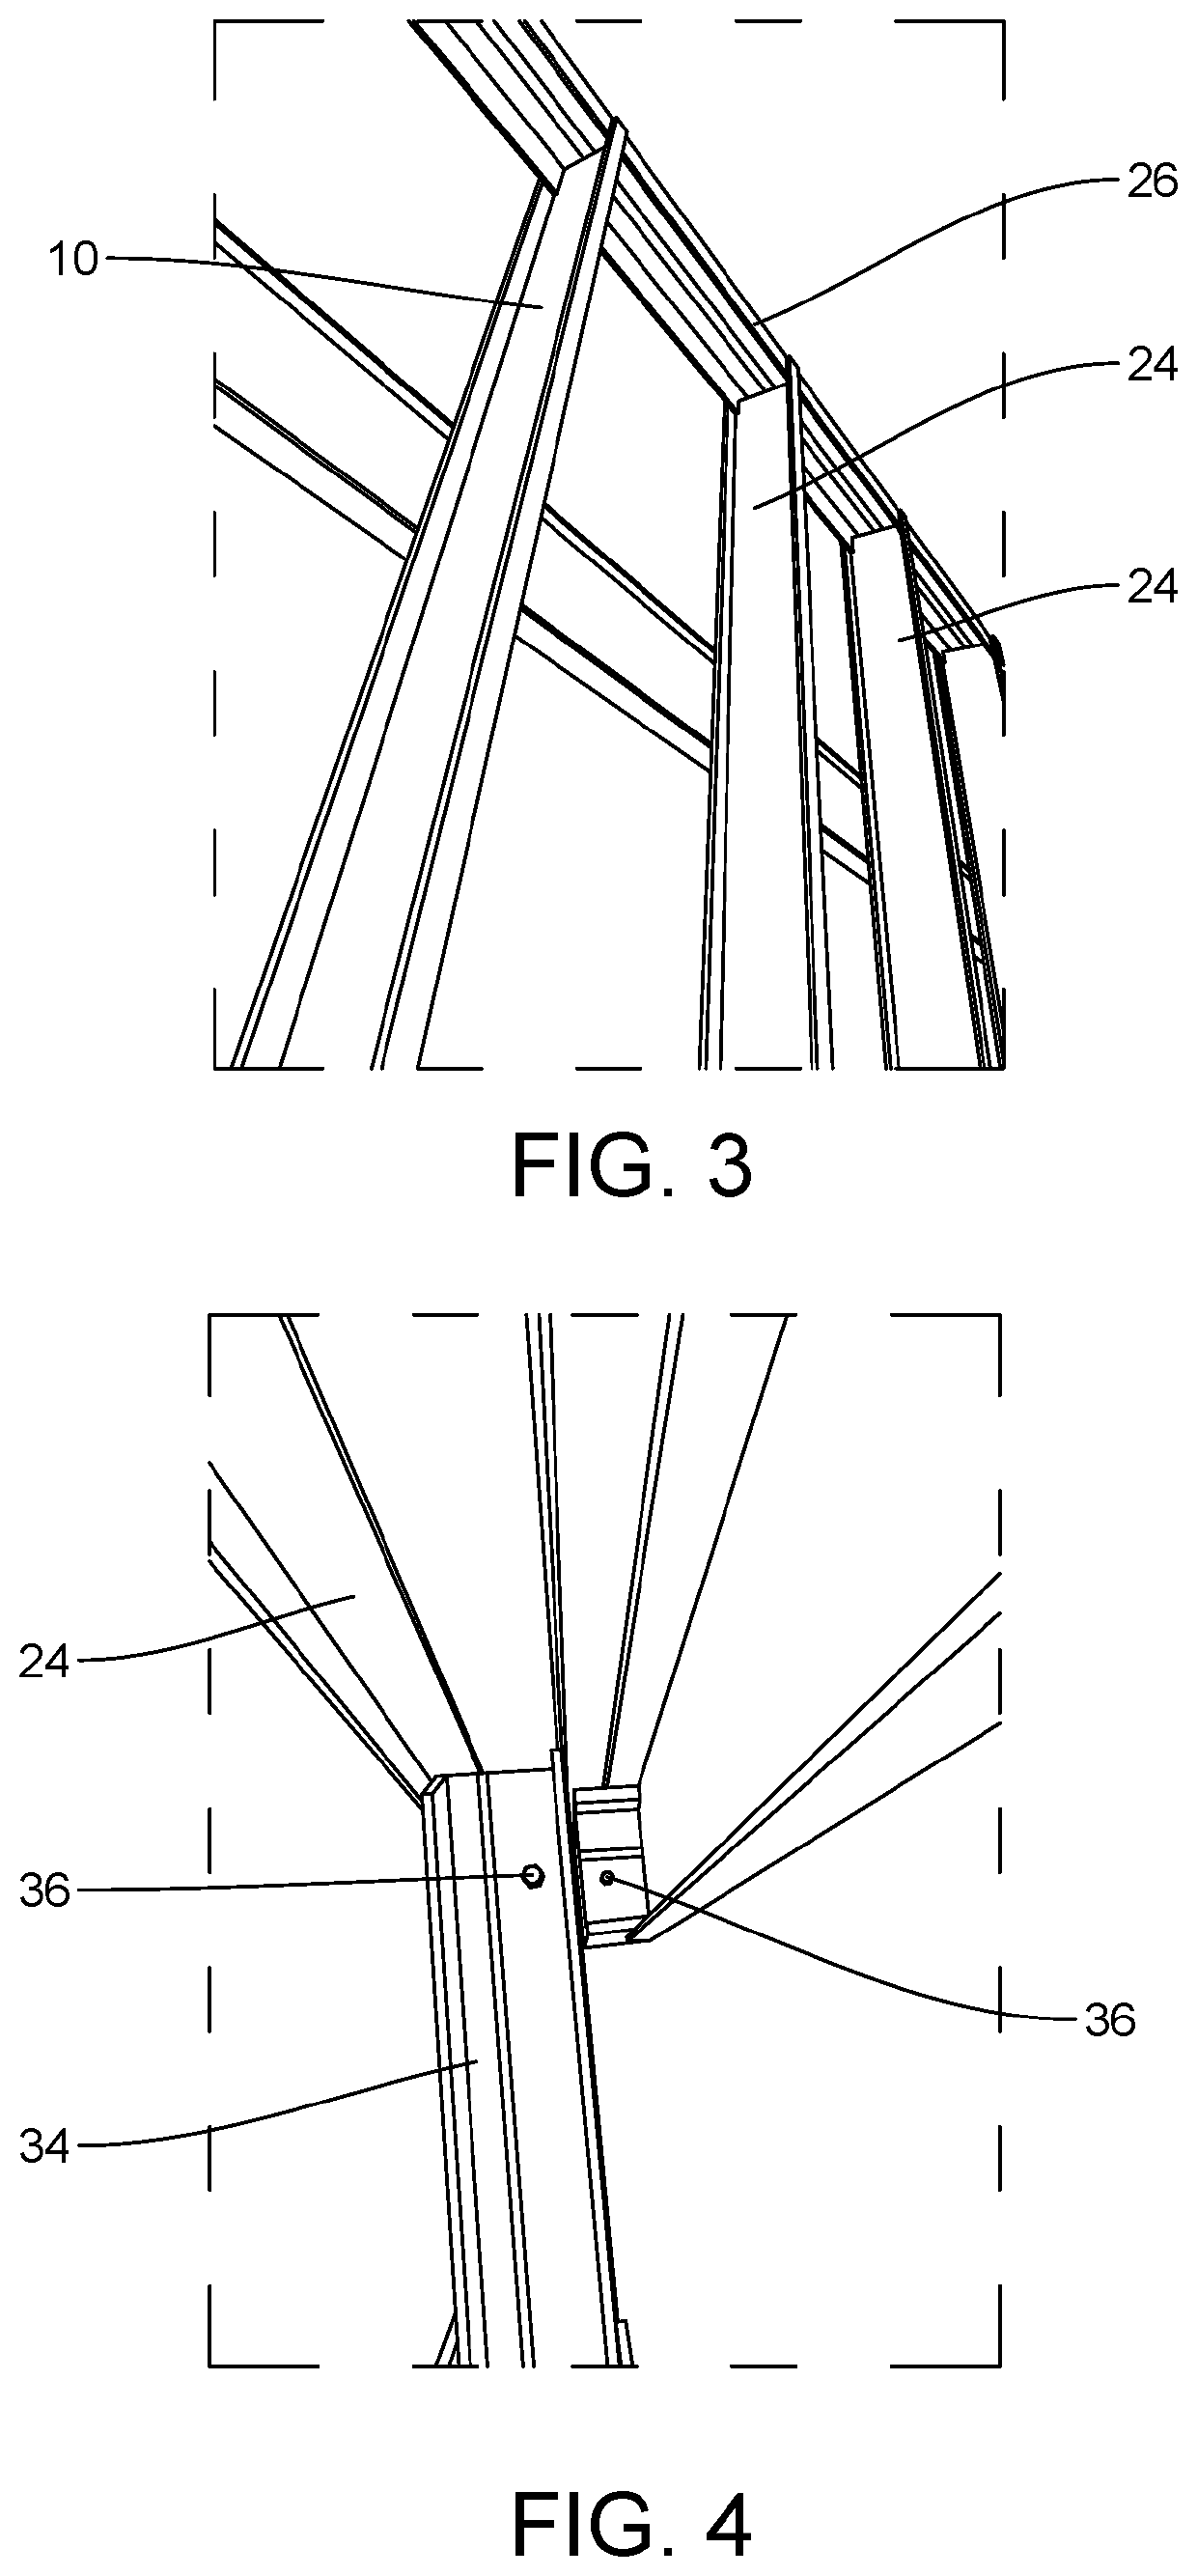 Apparatus, system and methods for structural exerior wall panel building systems